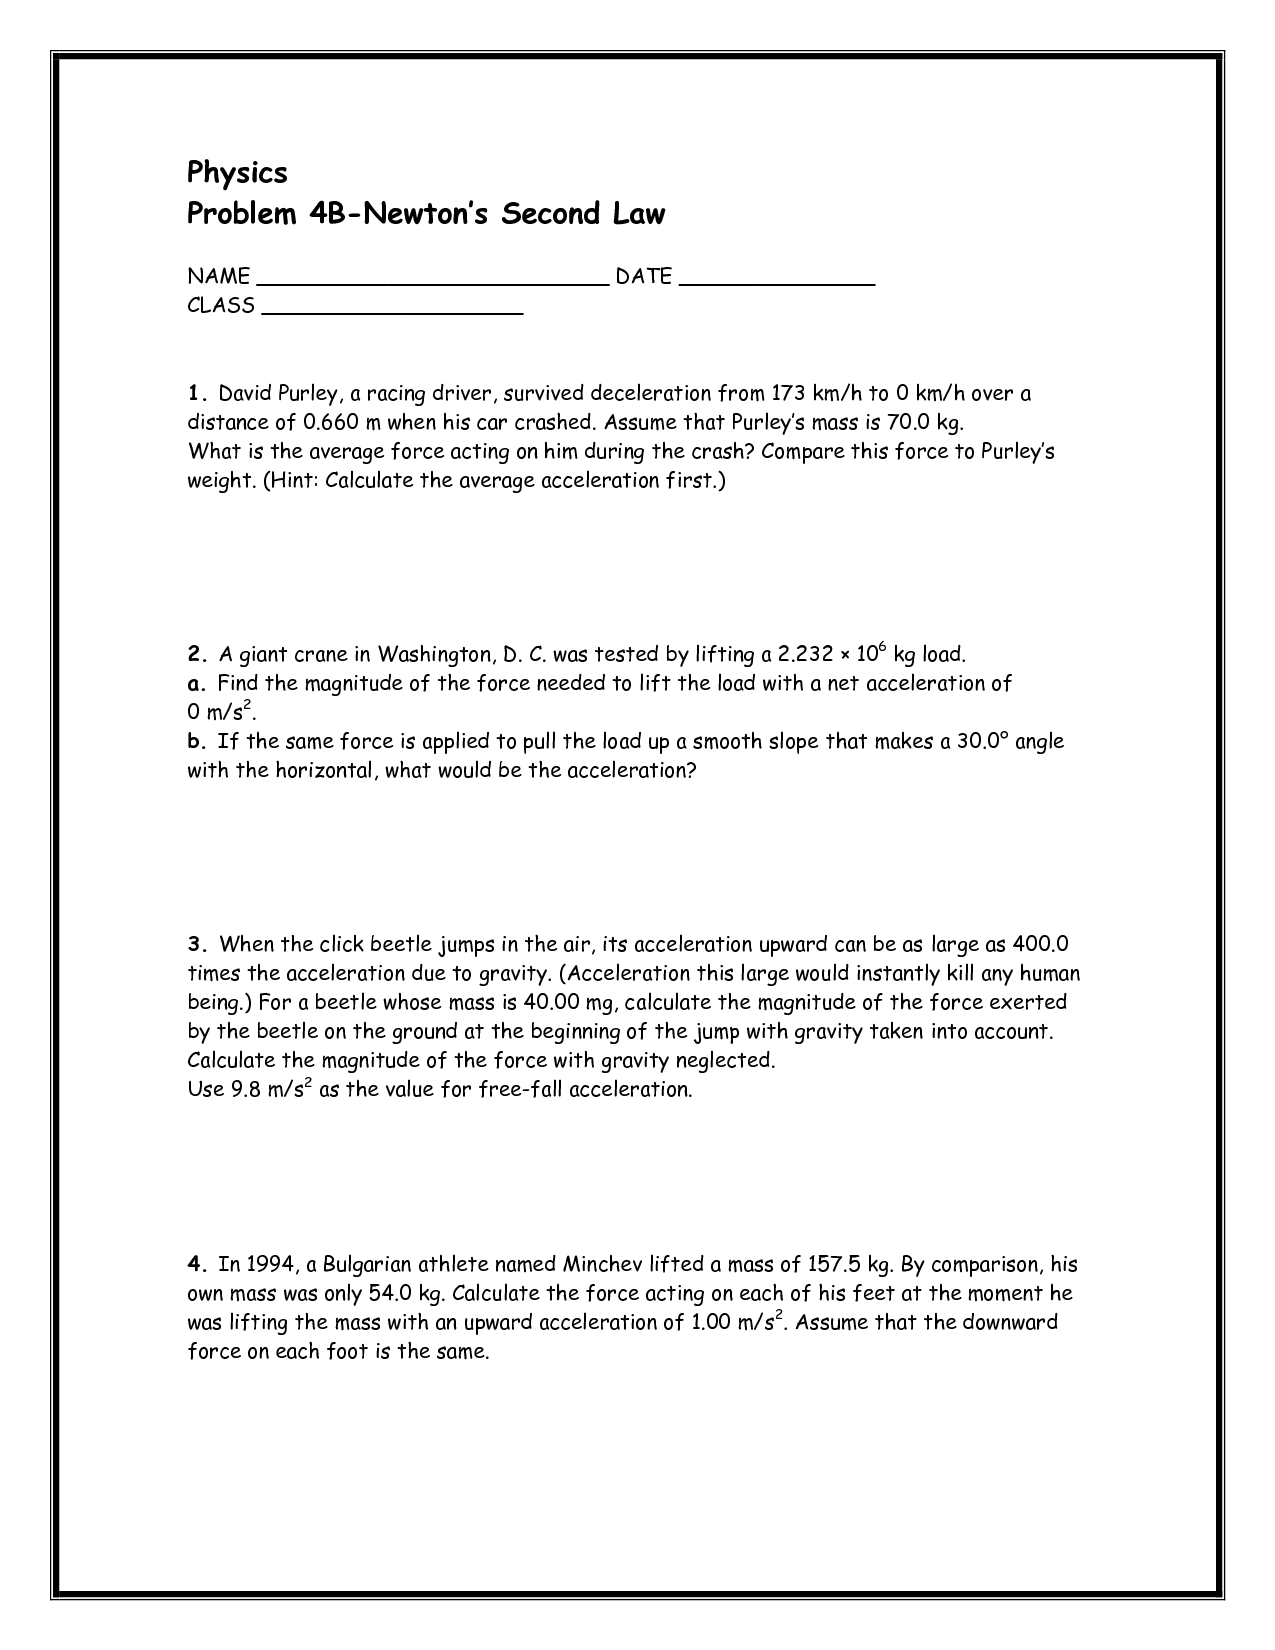 Newton's Second Law Worksheet